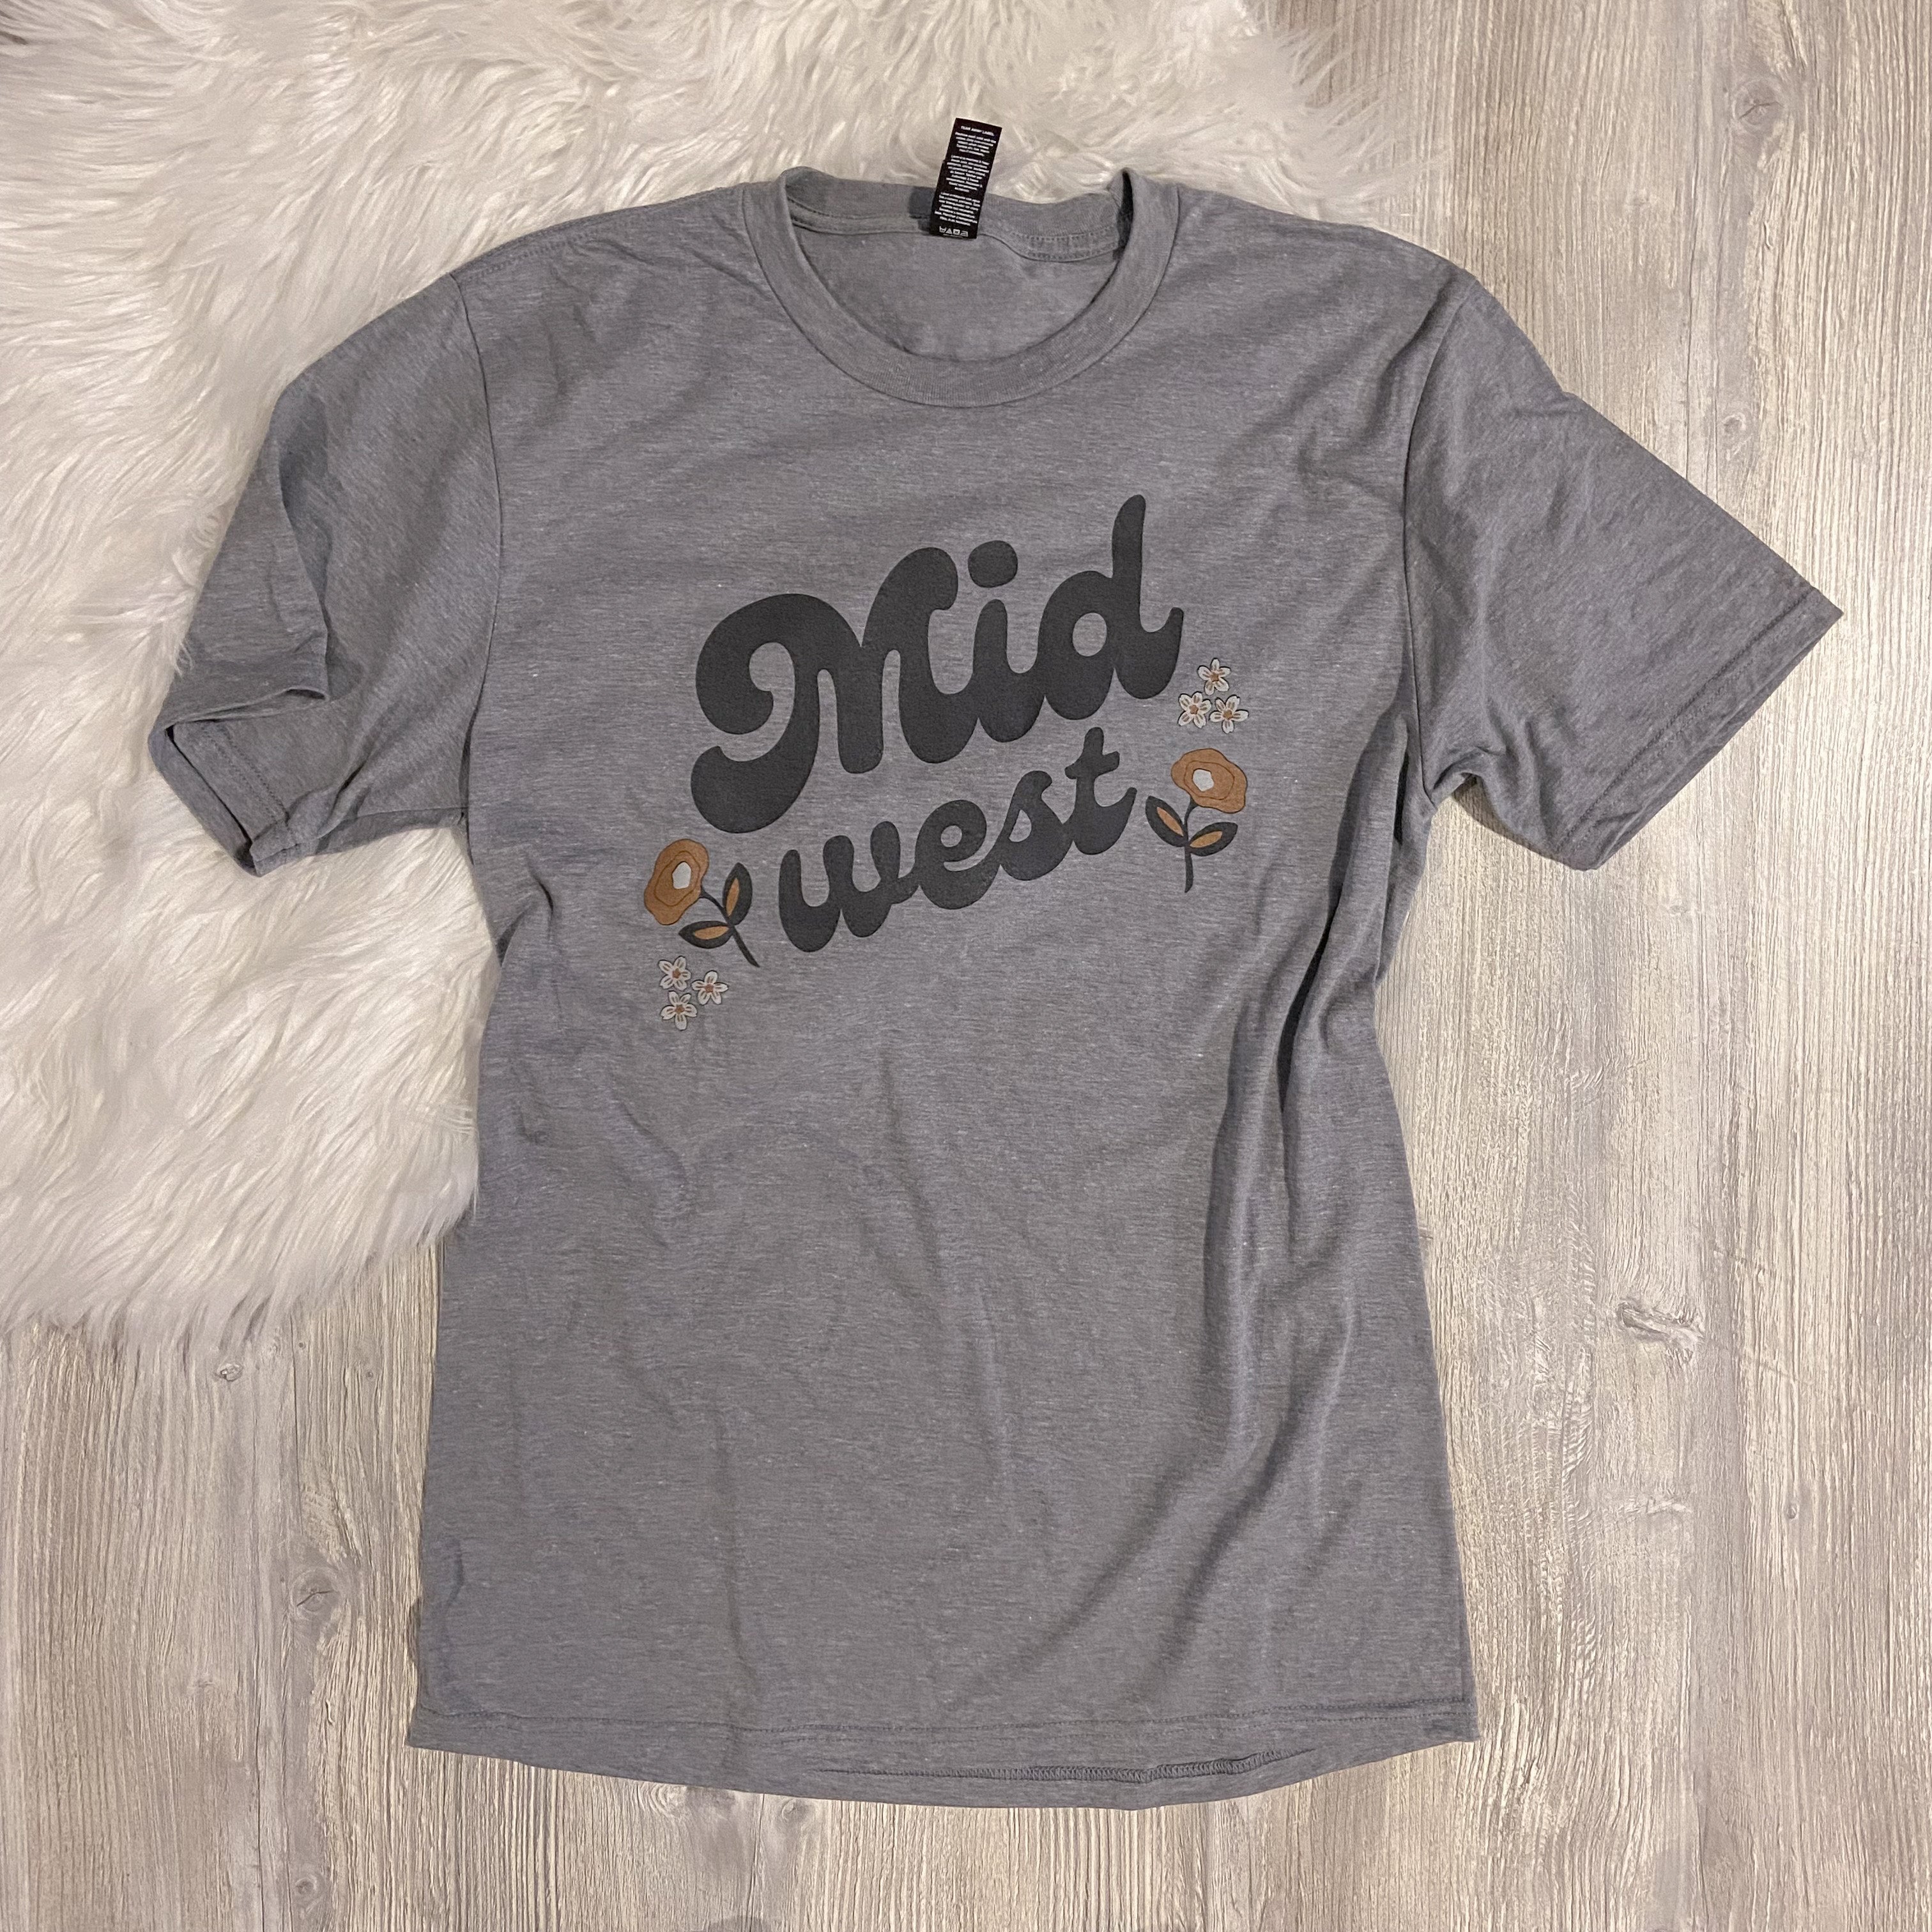 "Midwest" Graphic t-shirt